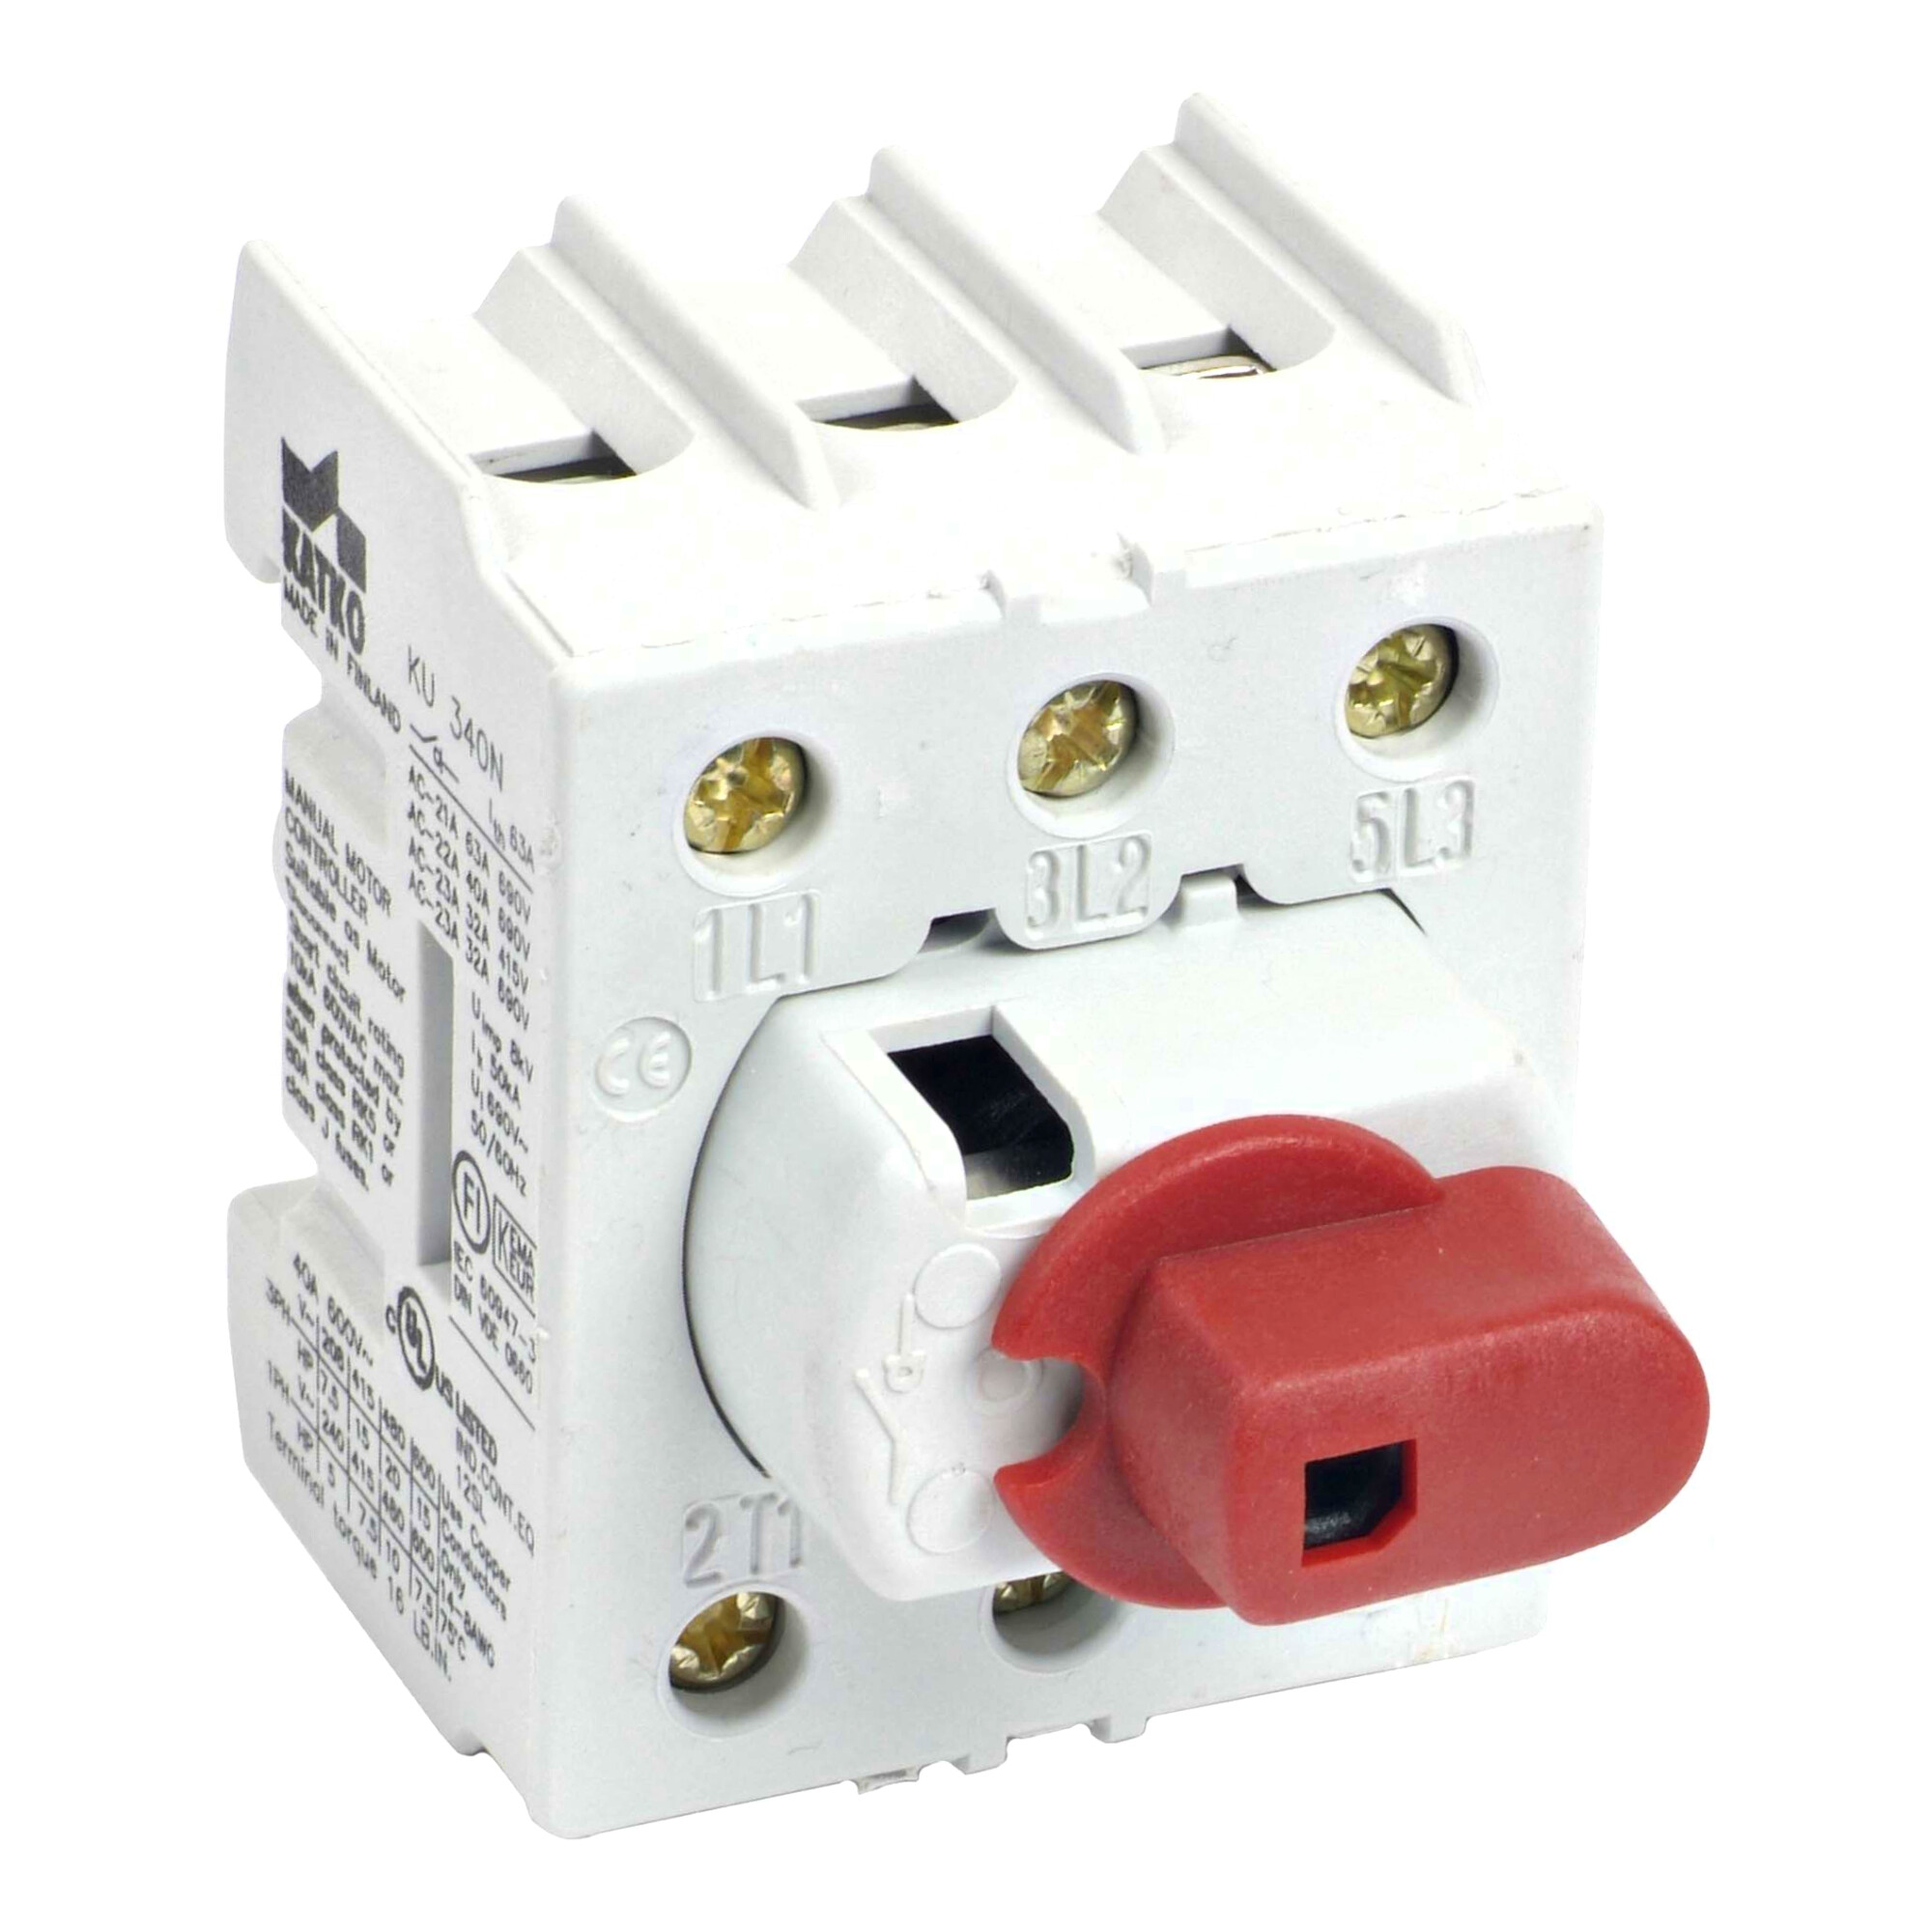 62-KU 316N KU-N 16-160A 3- and 4-pole IN/OUT, compact, suitable for DIN-EN rail. The 4-pole version is also available with early-make and late-break neutral pole. The silver contactsensures safe and durable operation. Series KU modular design.